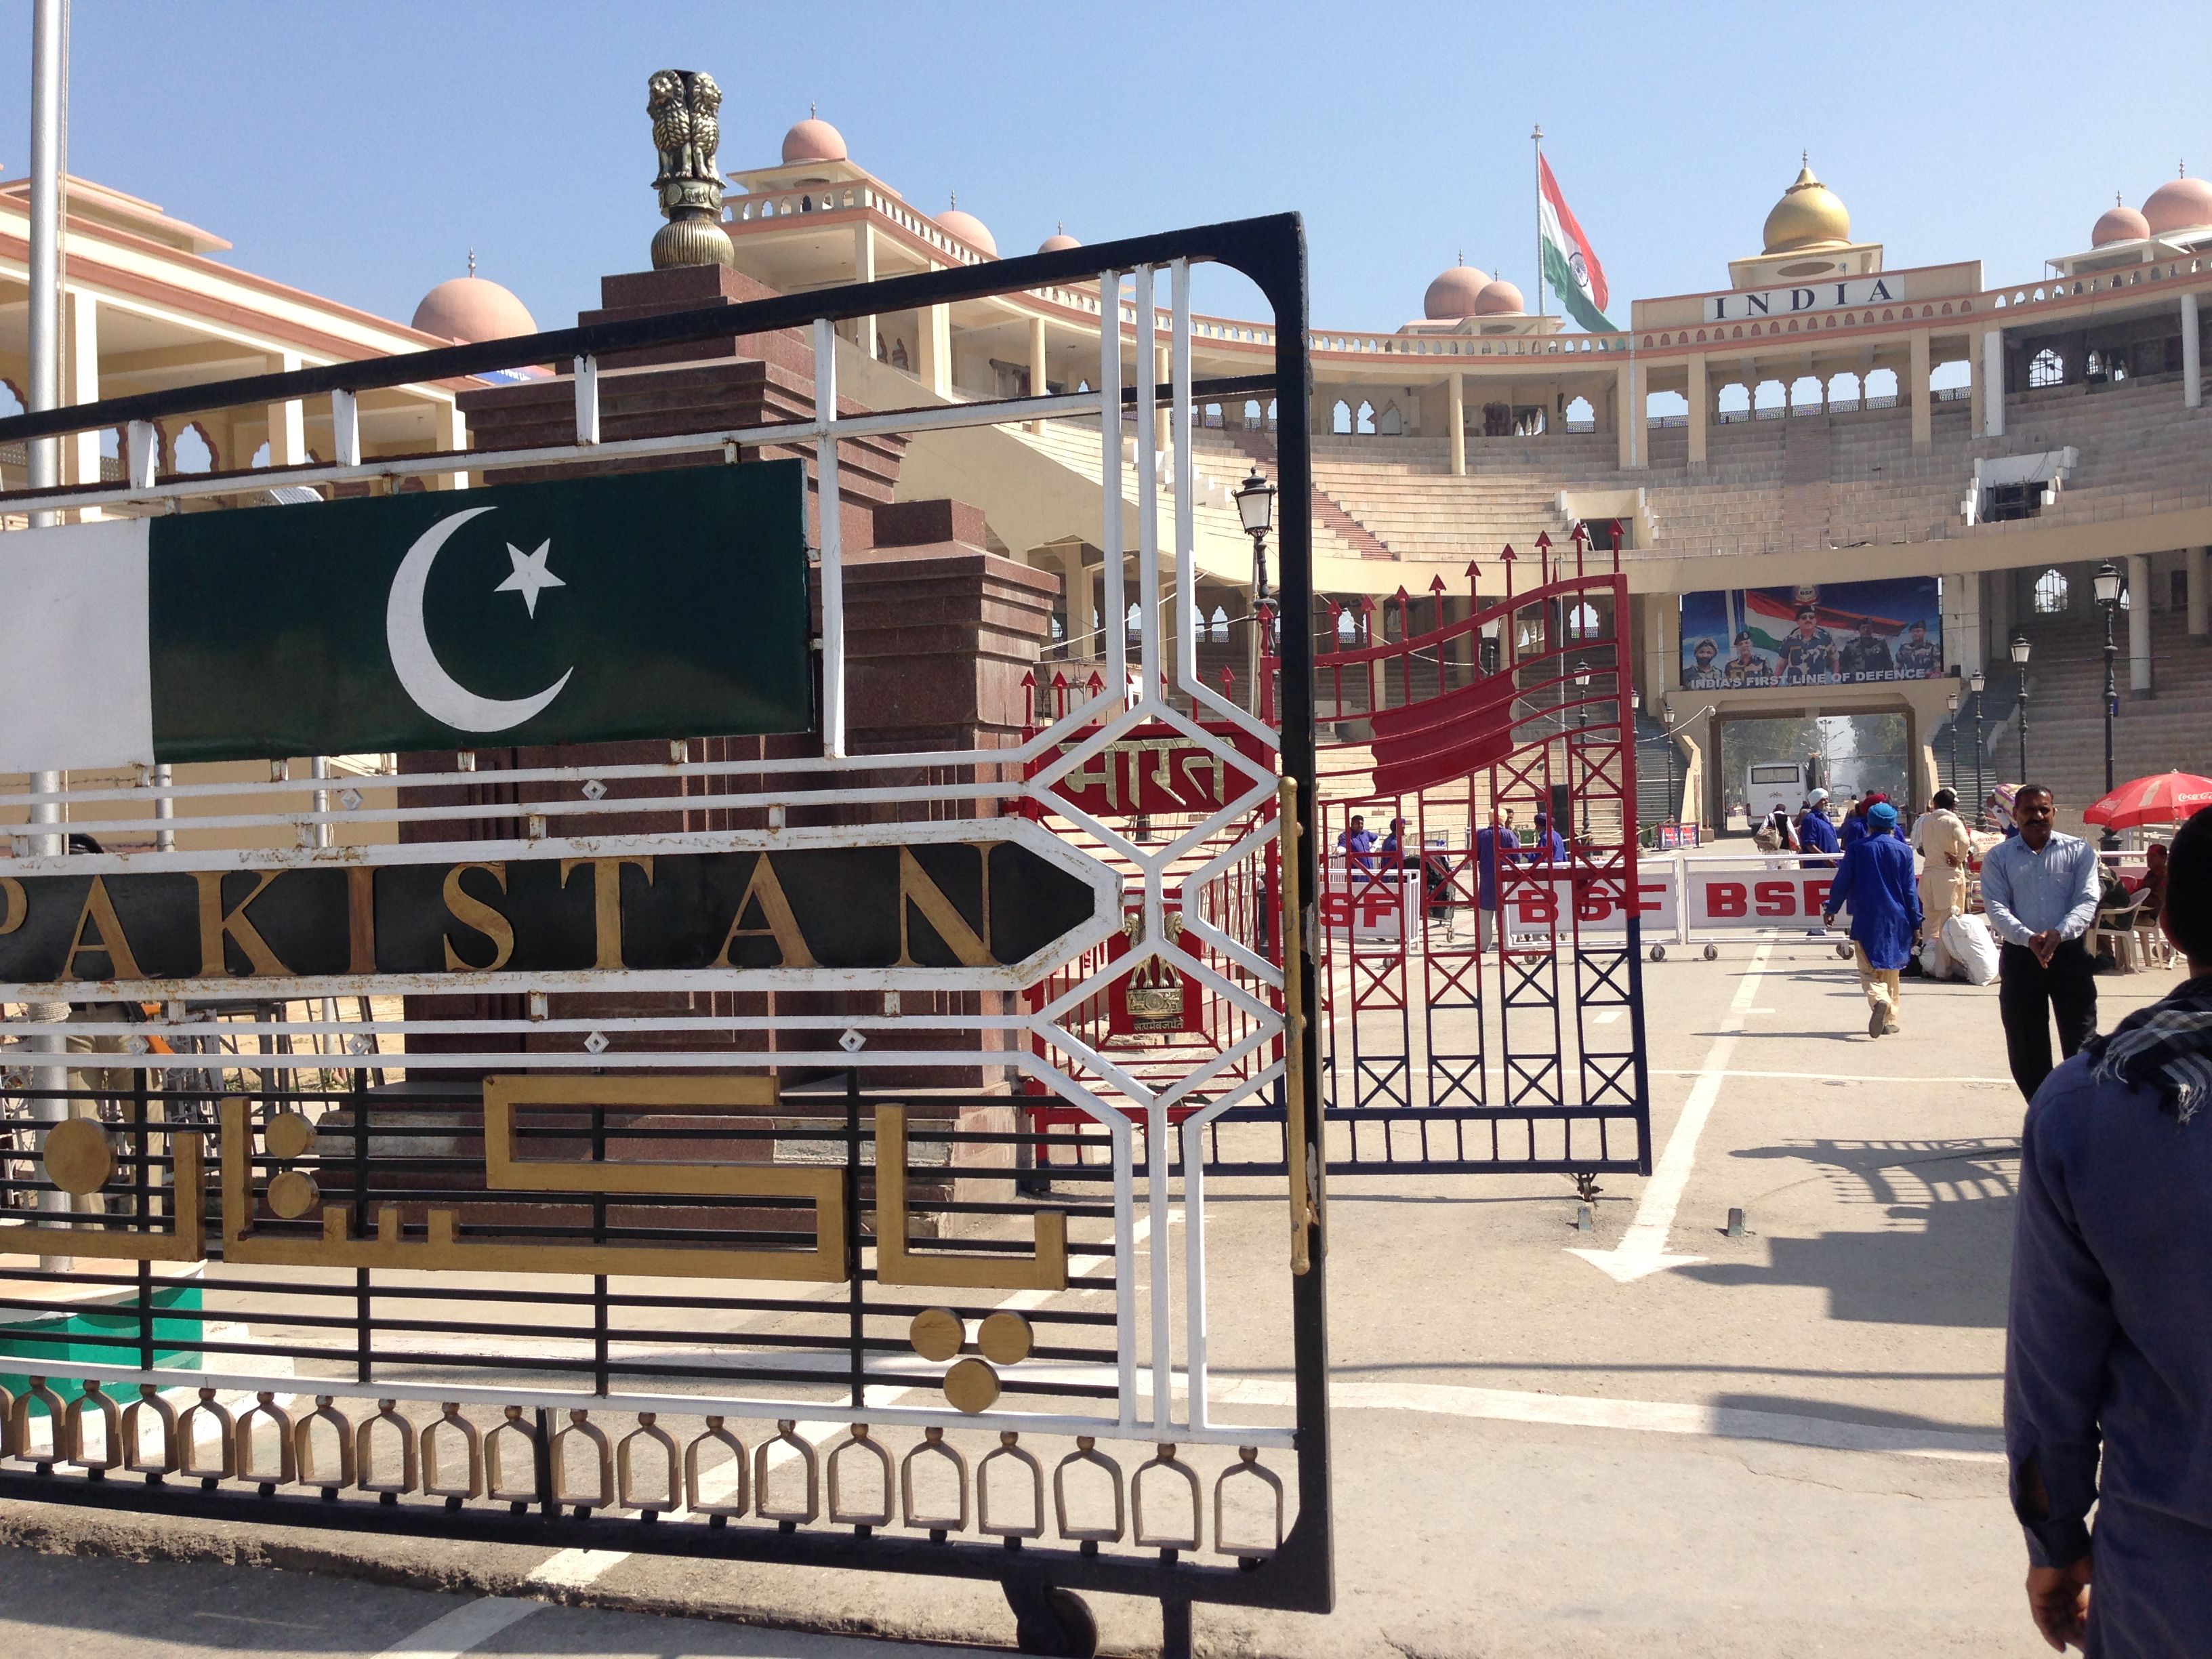 Crossing the Wagah border India to Pakistan